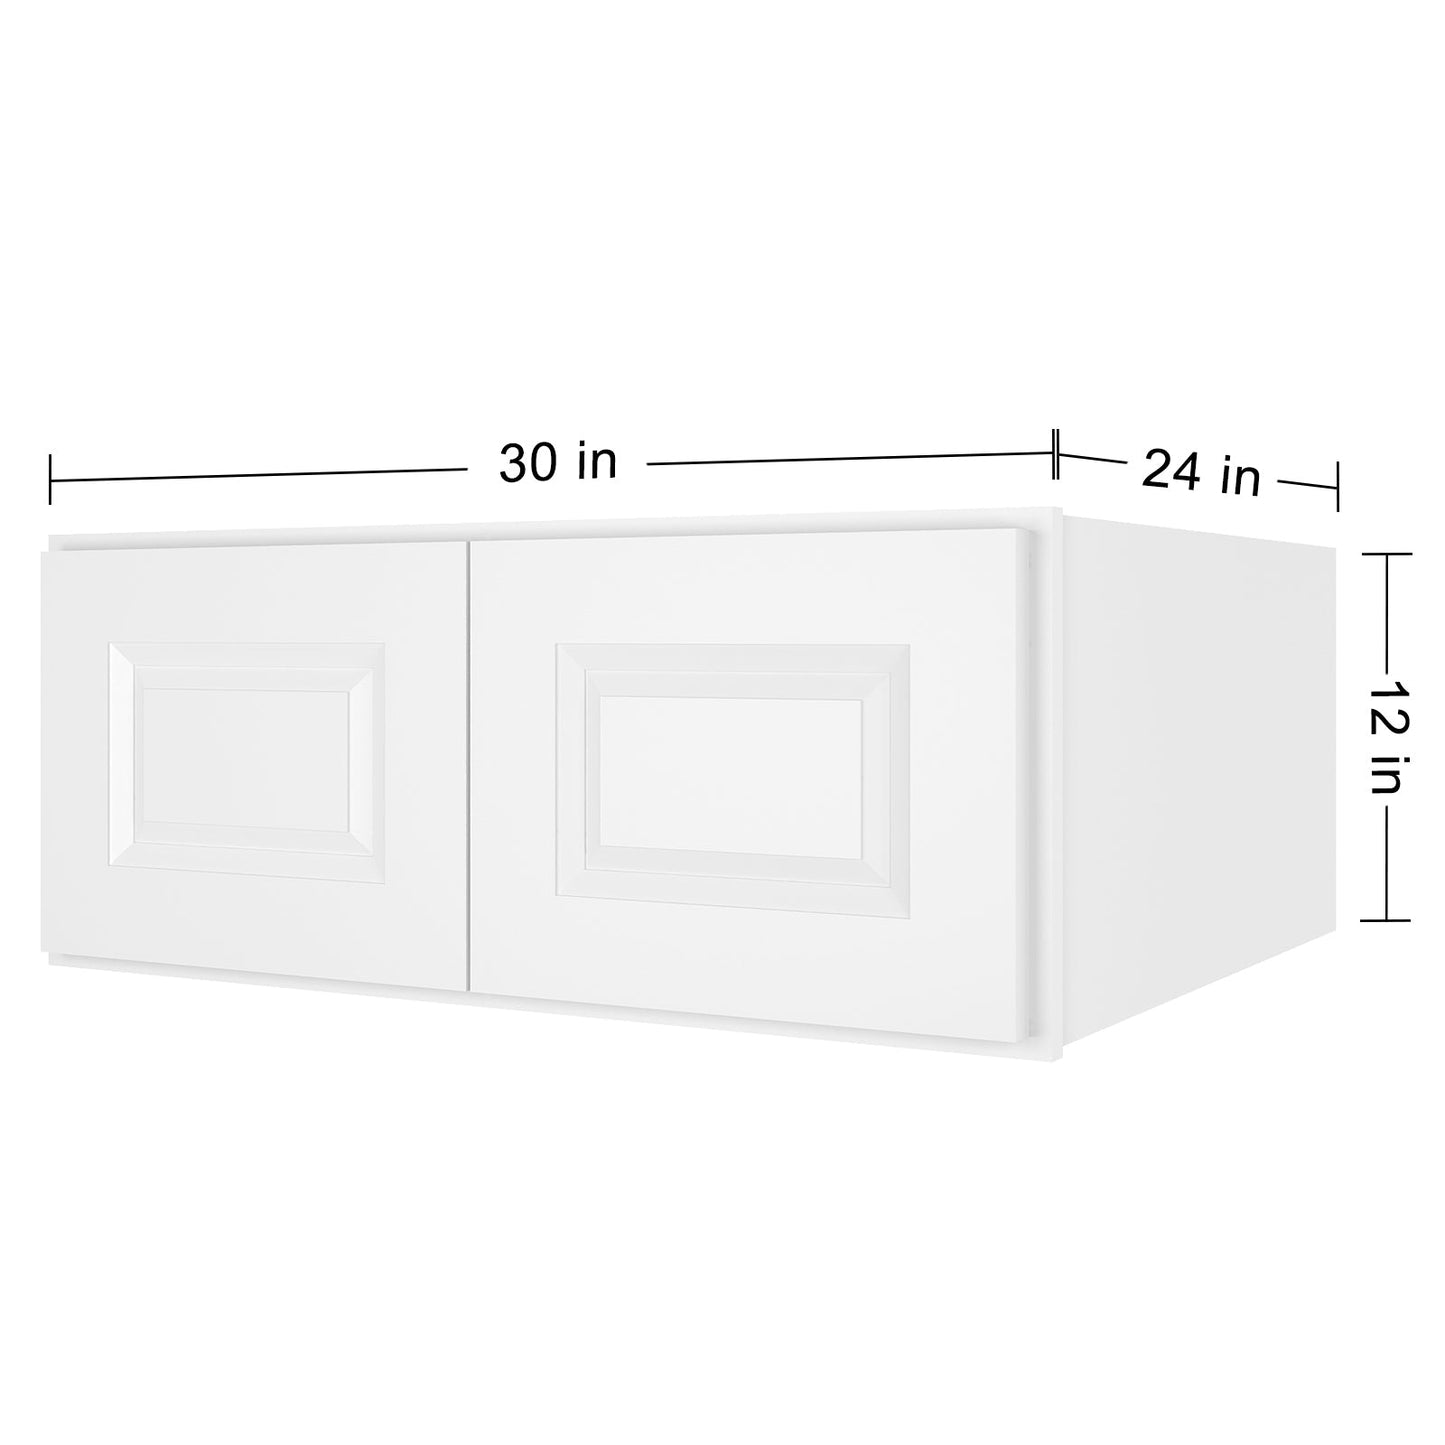 Medicine Cabinet Wall Mounted W301224